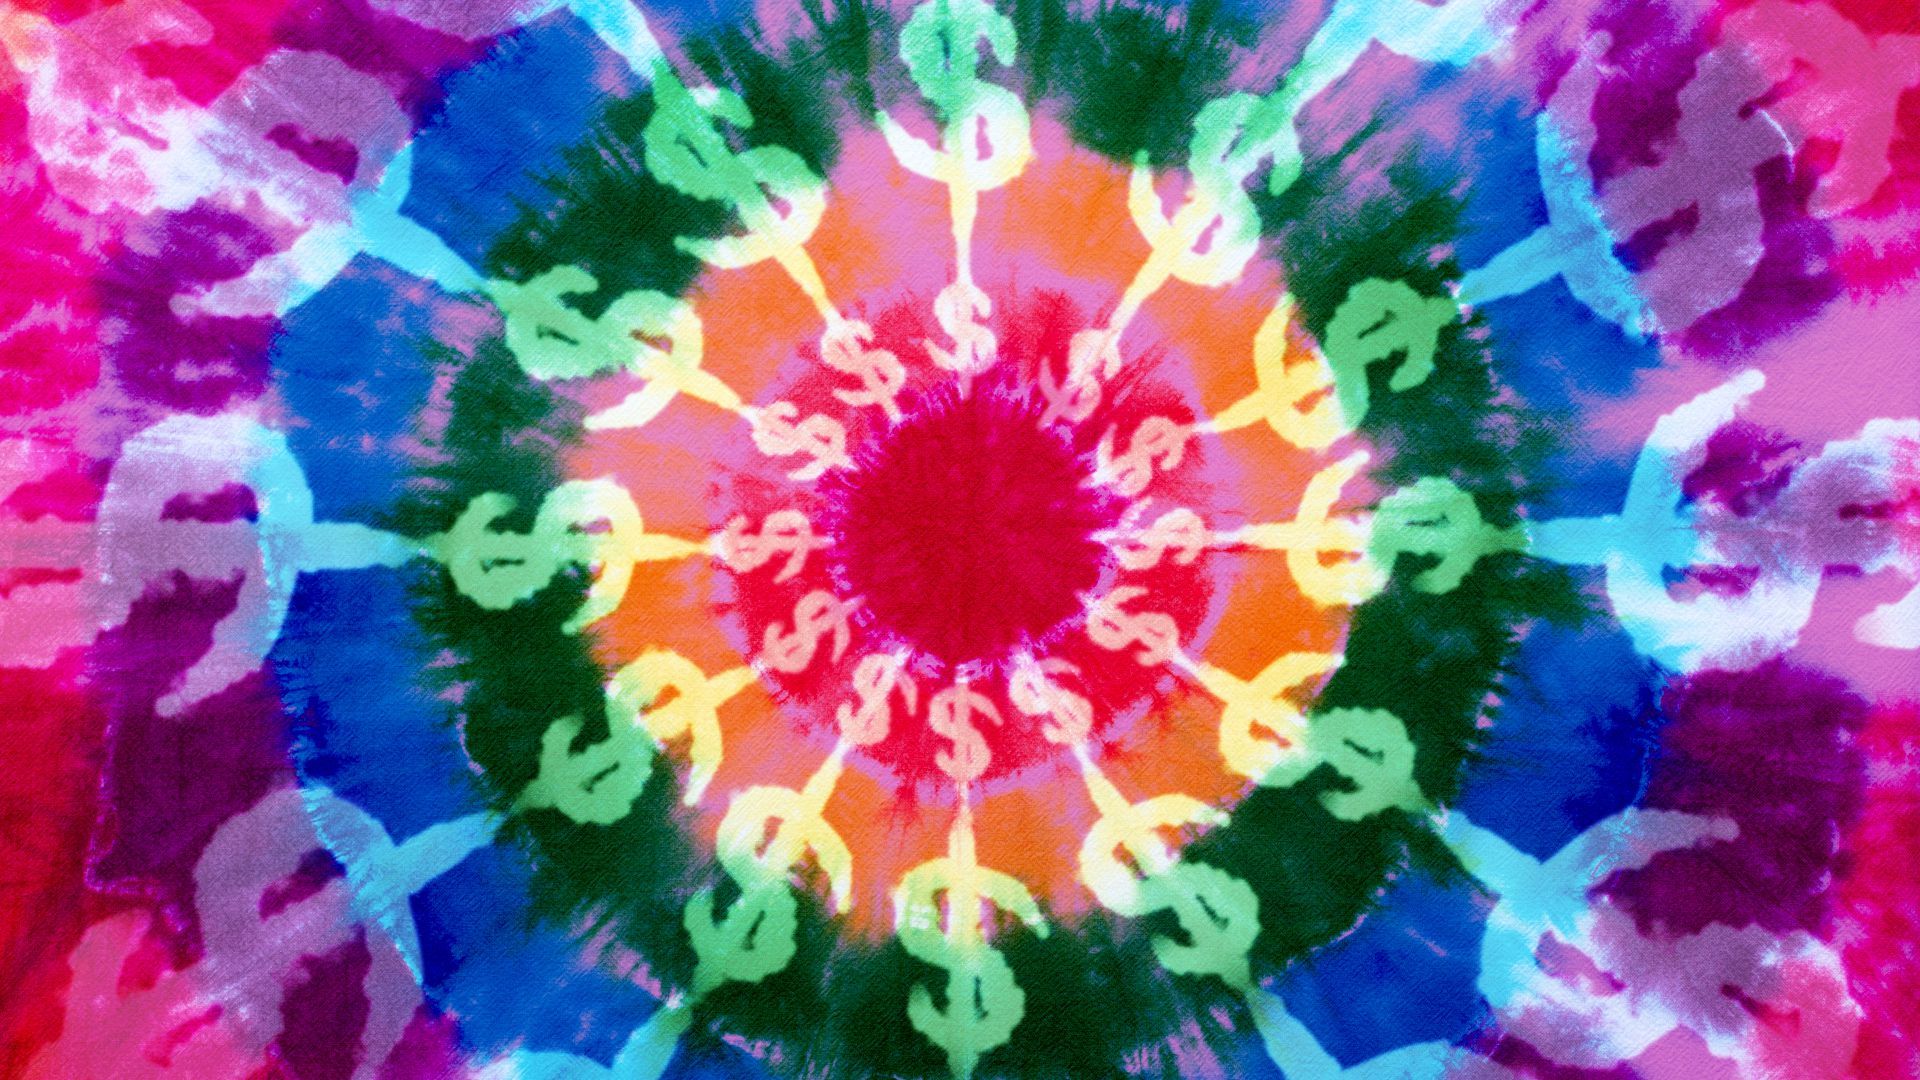 Illustration of a tie dye pattern with dollar signs in it